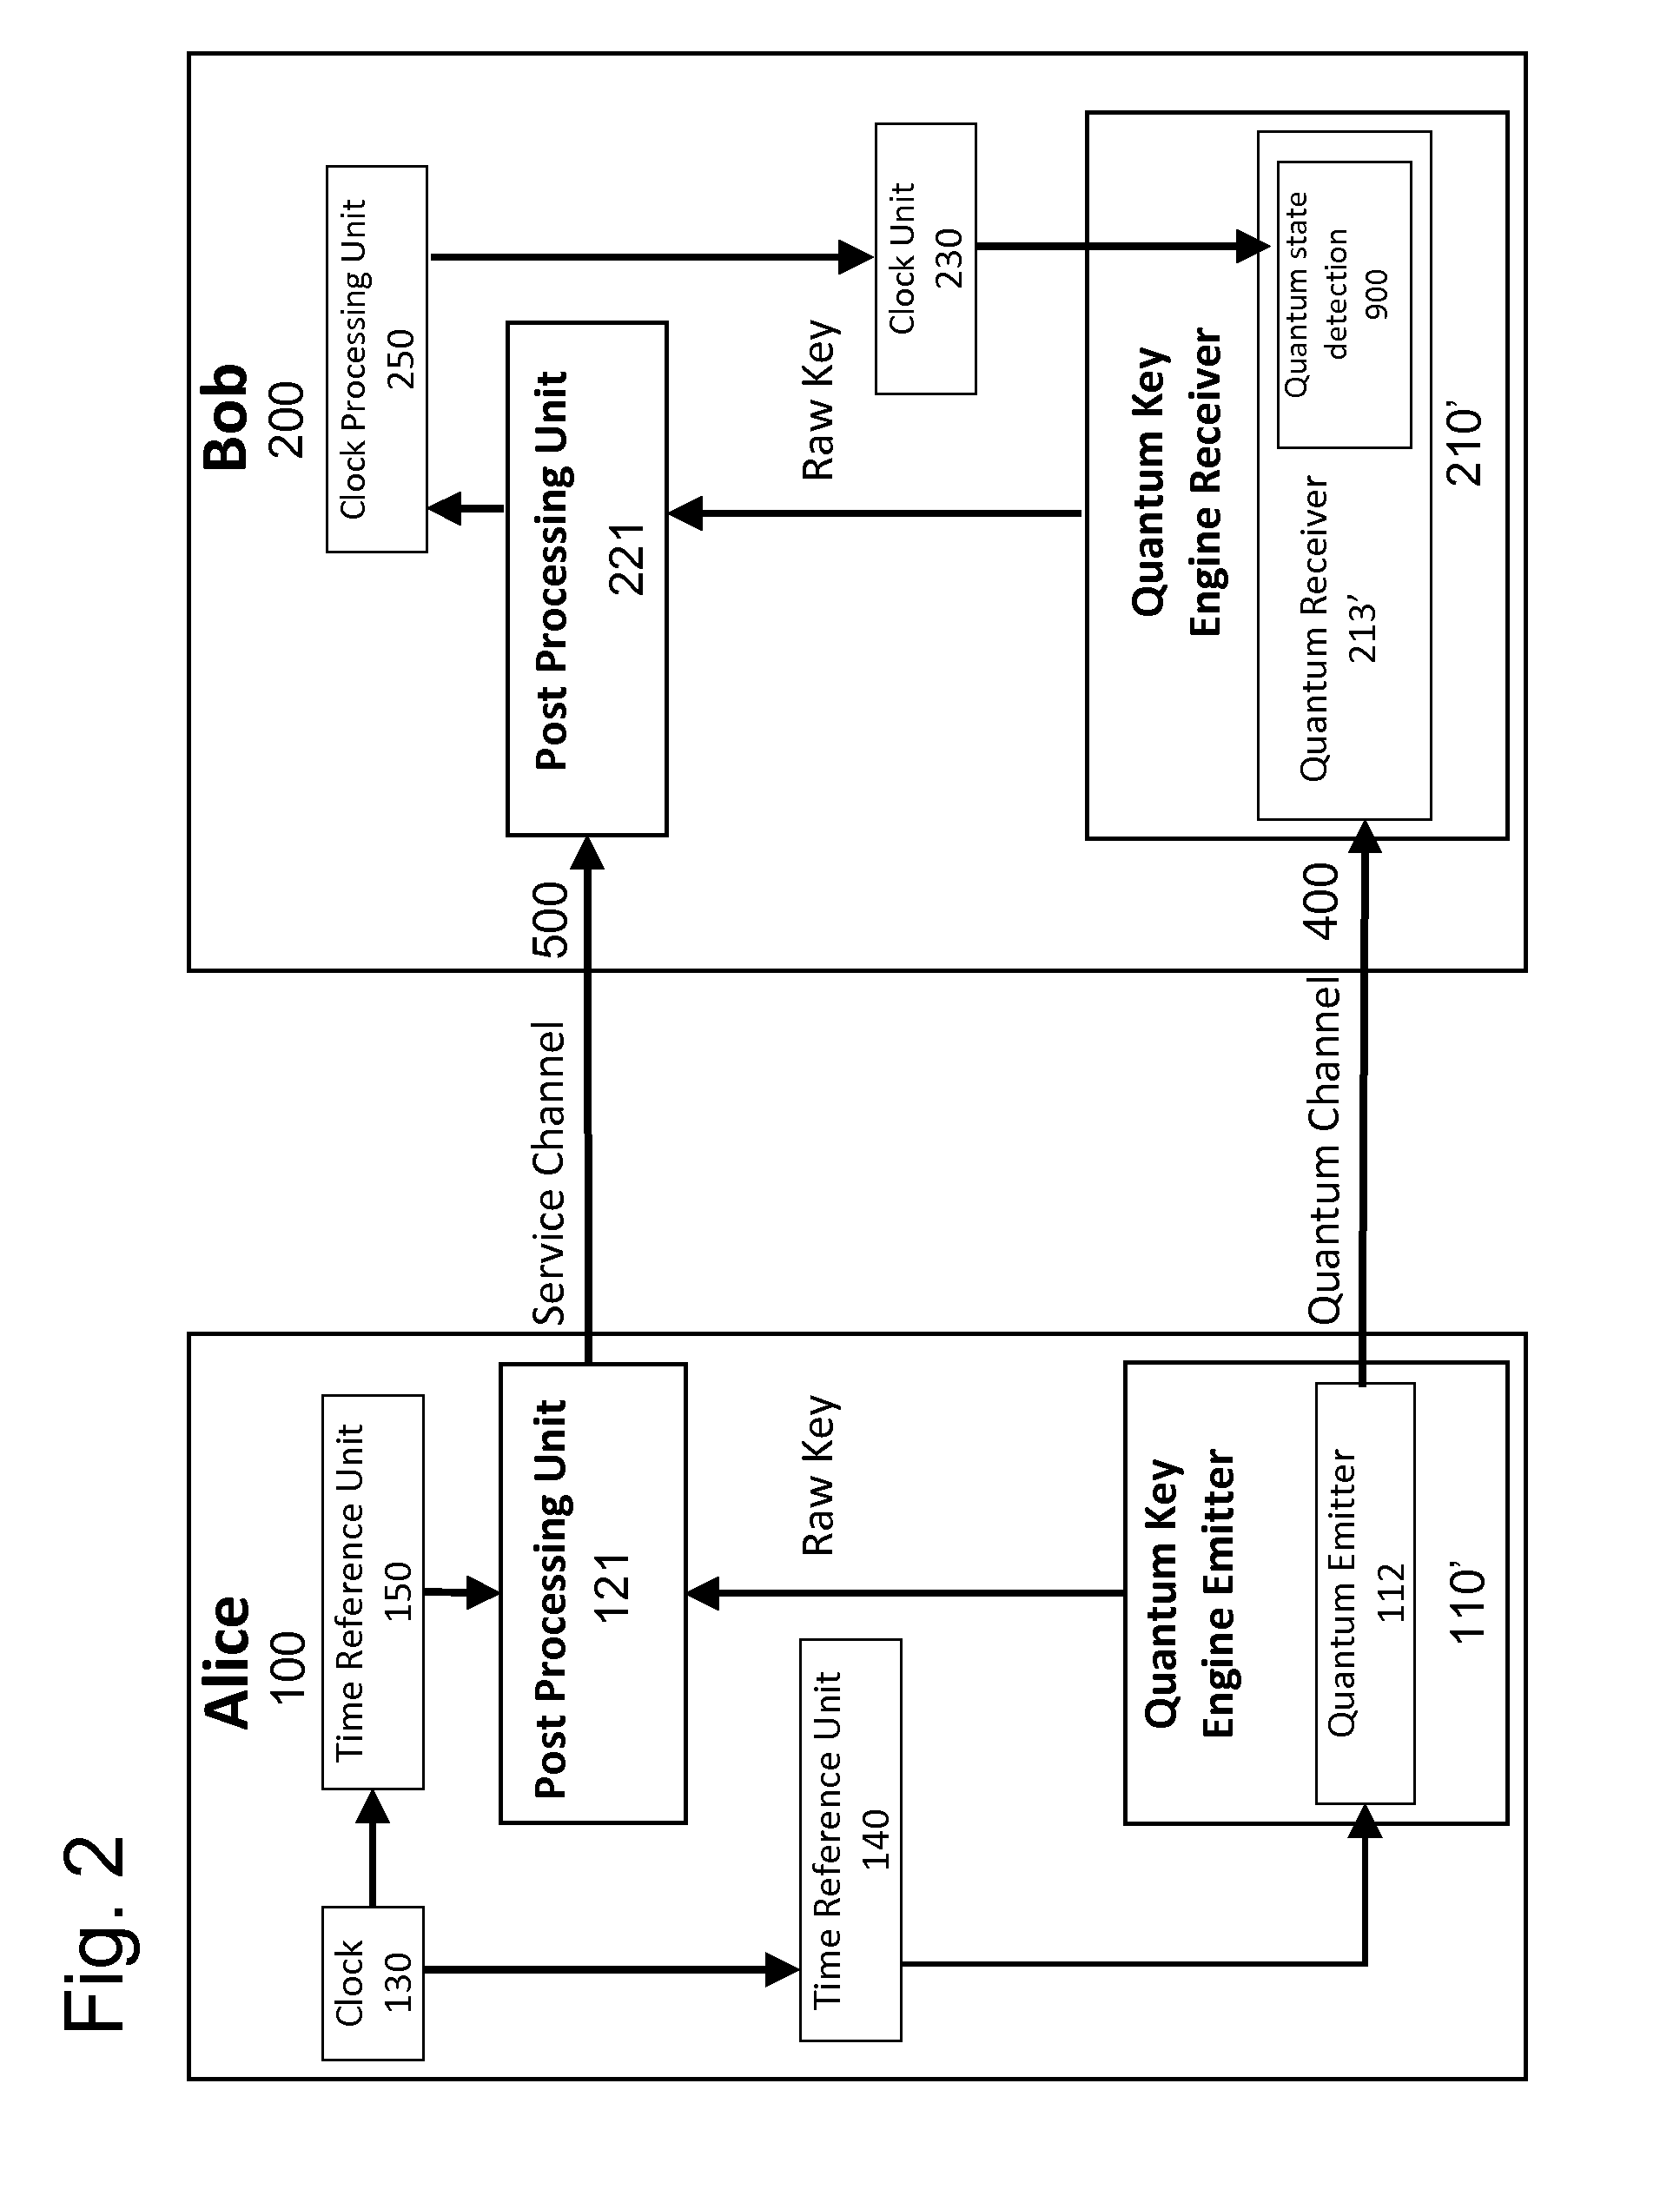 Apparatus and method for qkd quantum communication channel continuous synchronization and alignment